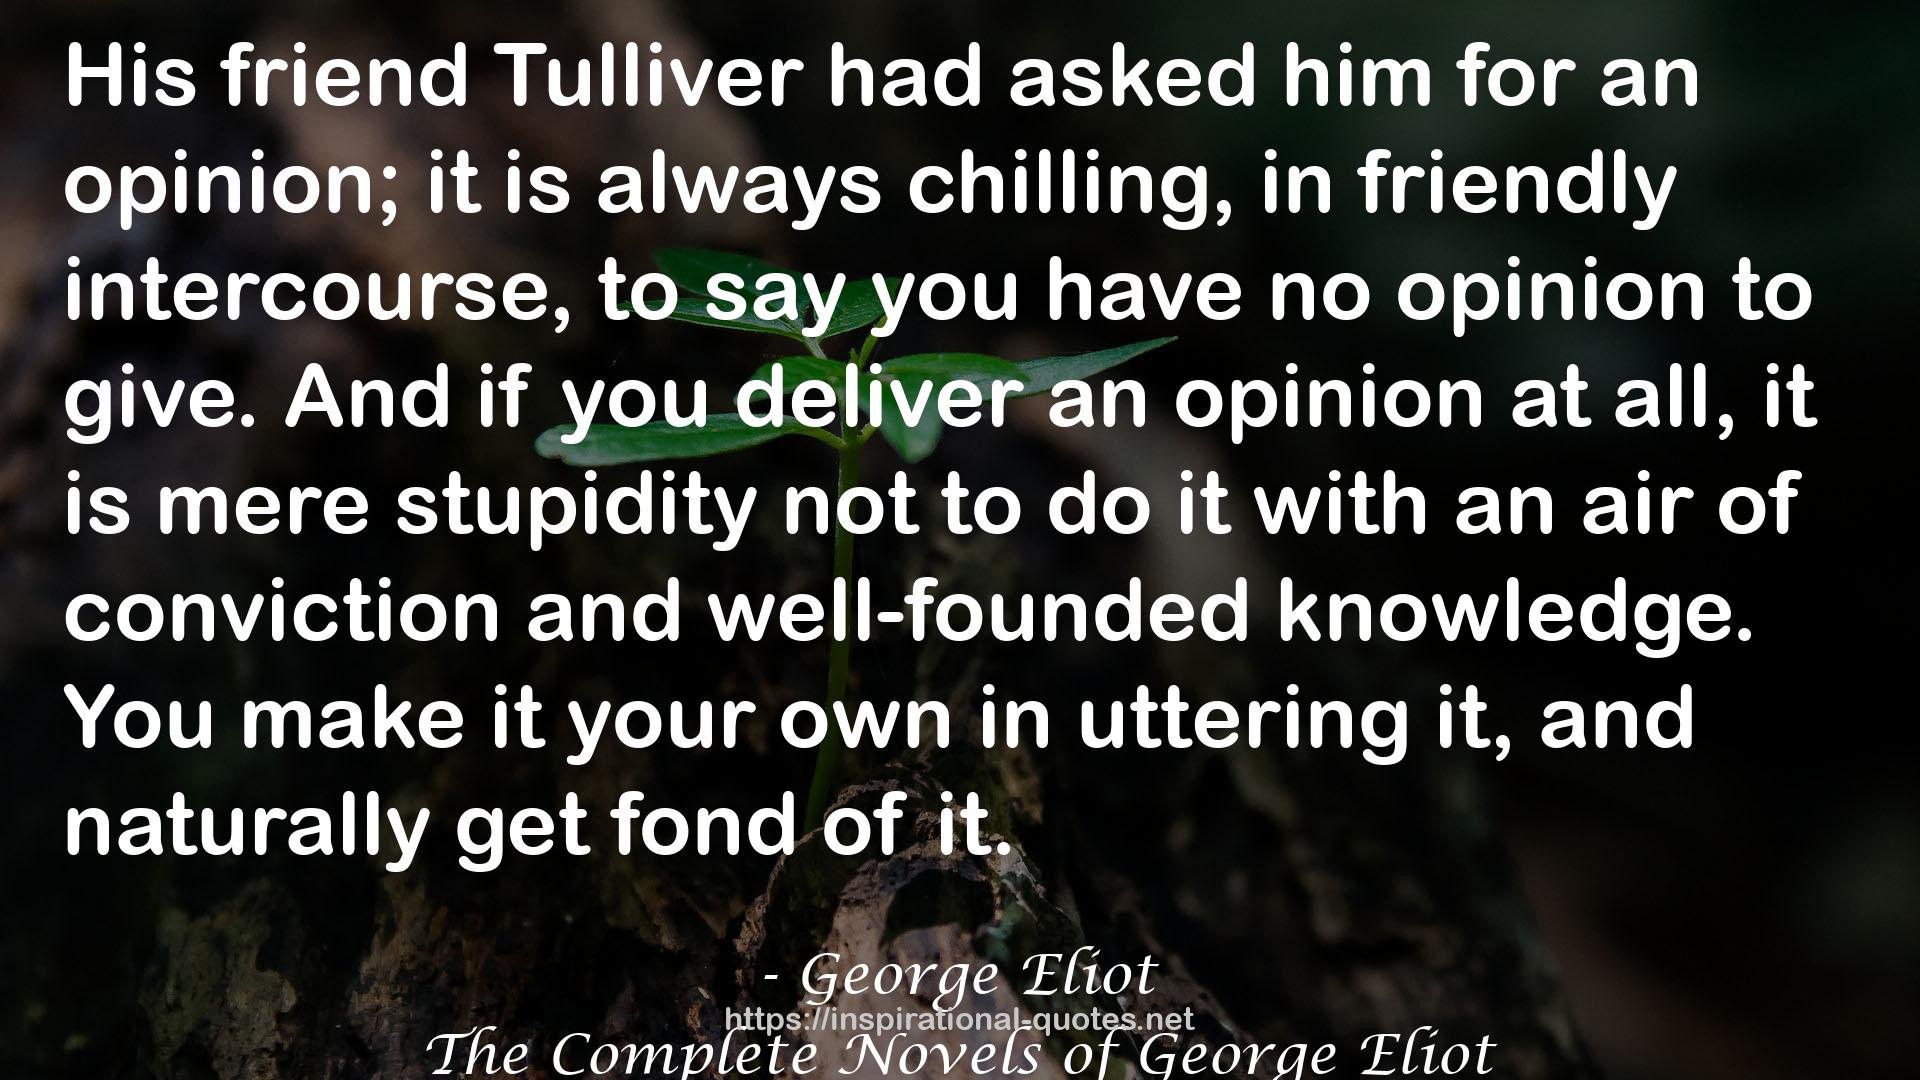 The Complete Novels of George Eliot QUOTES